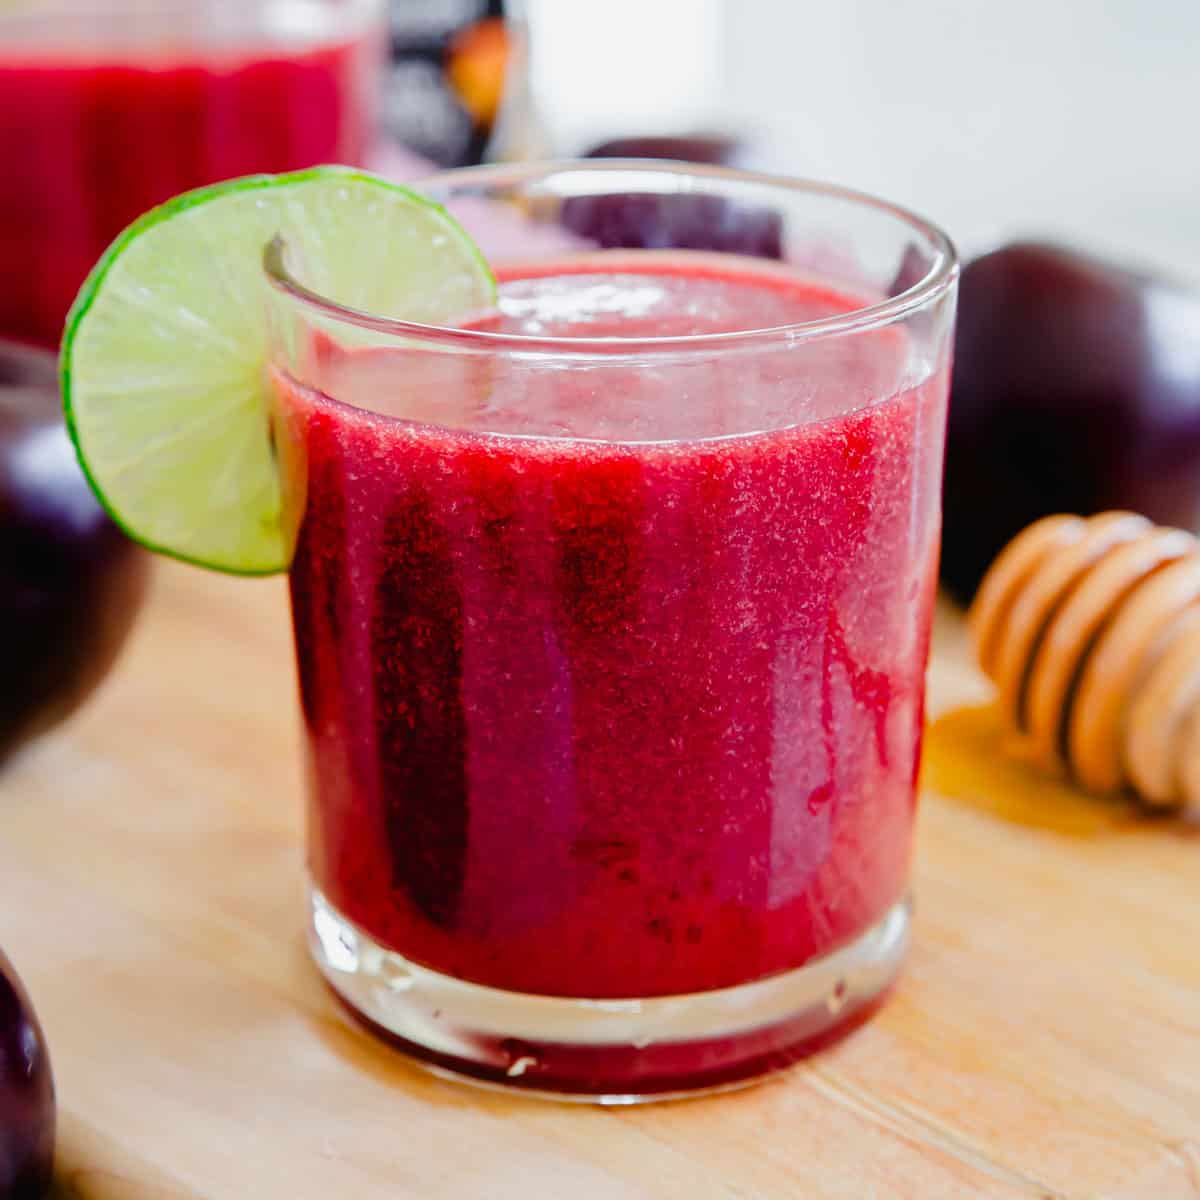 A plum juice drink with a slice of lime on a wooden cutting board.